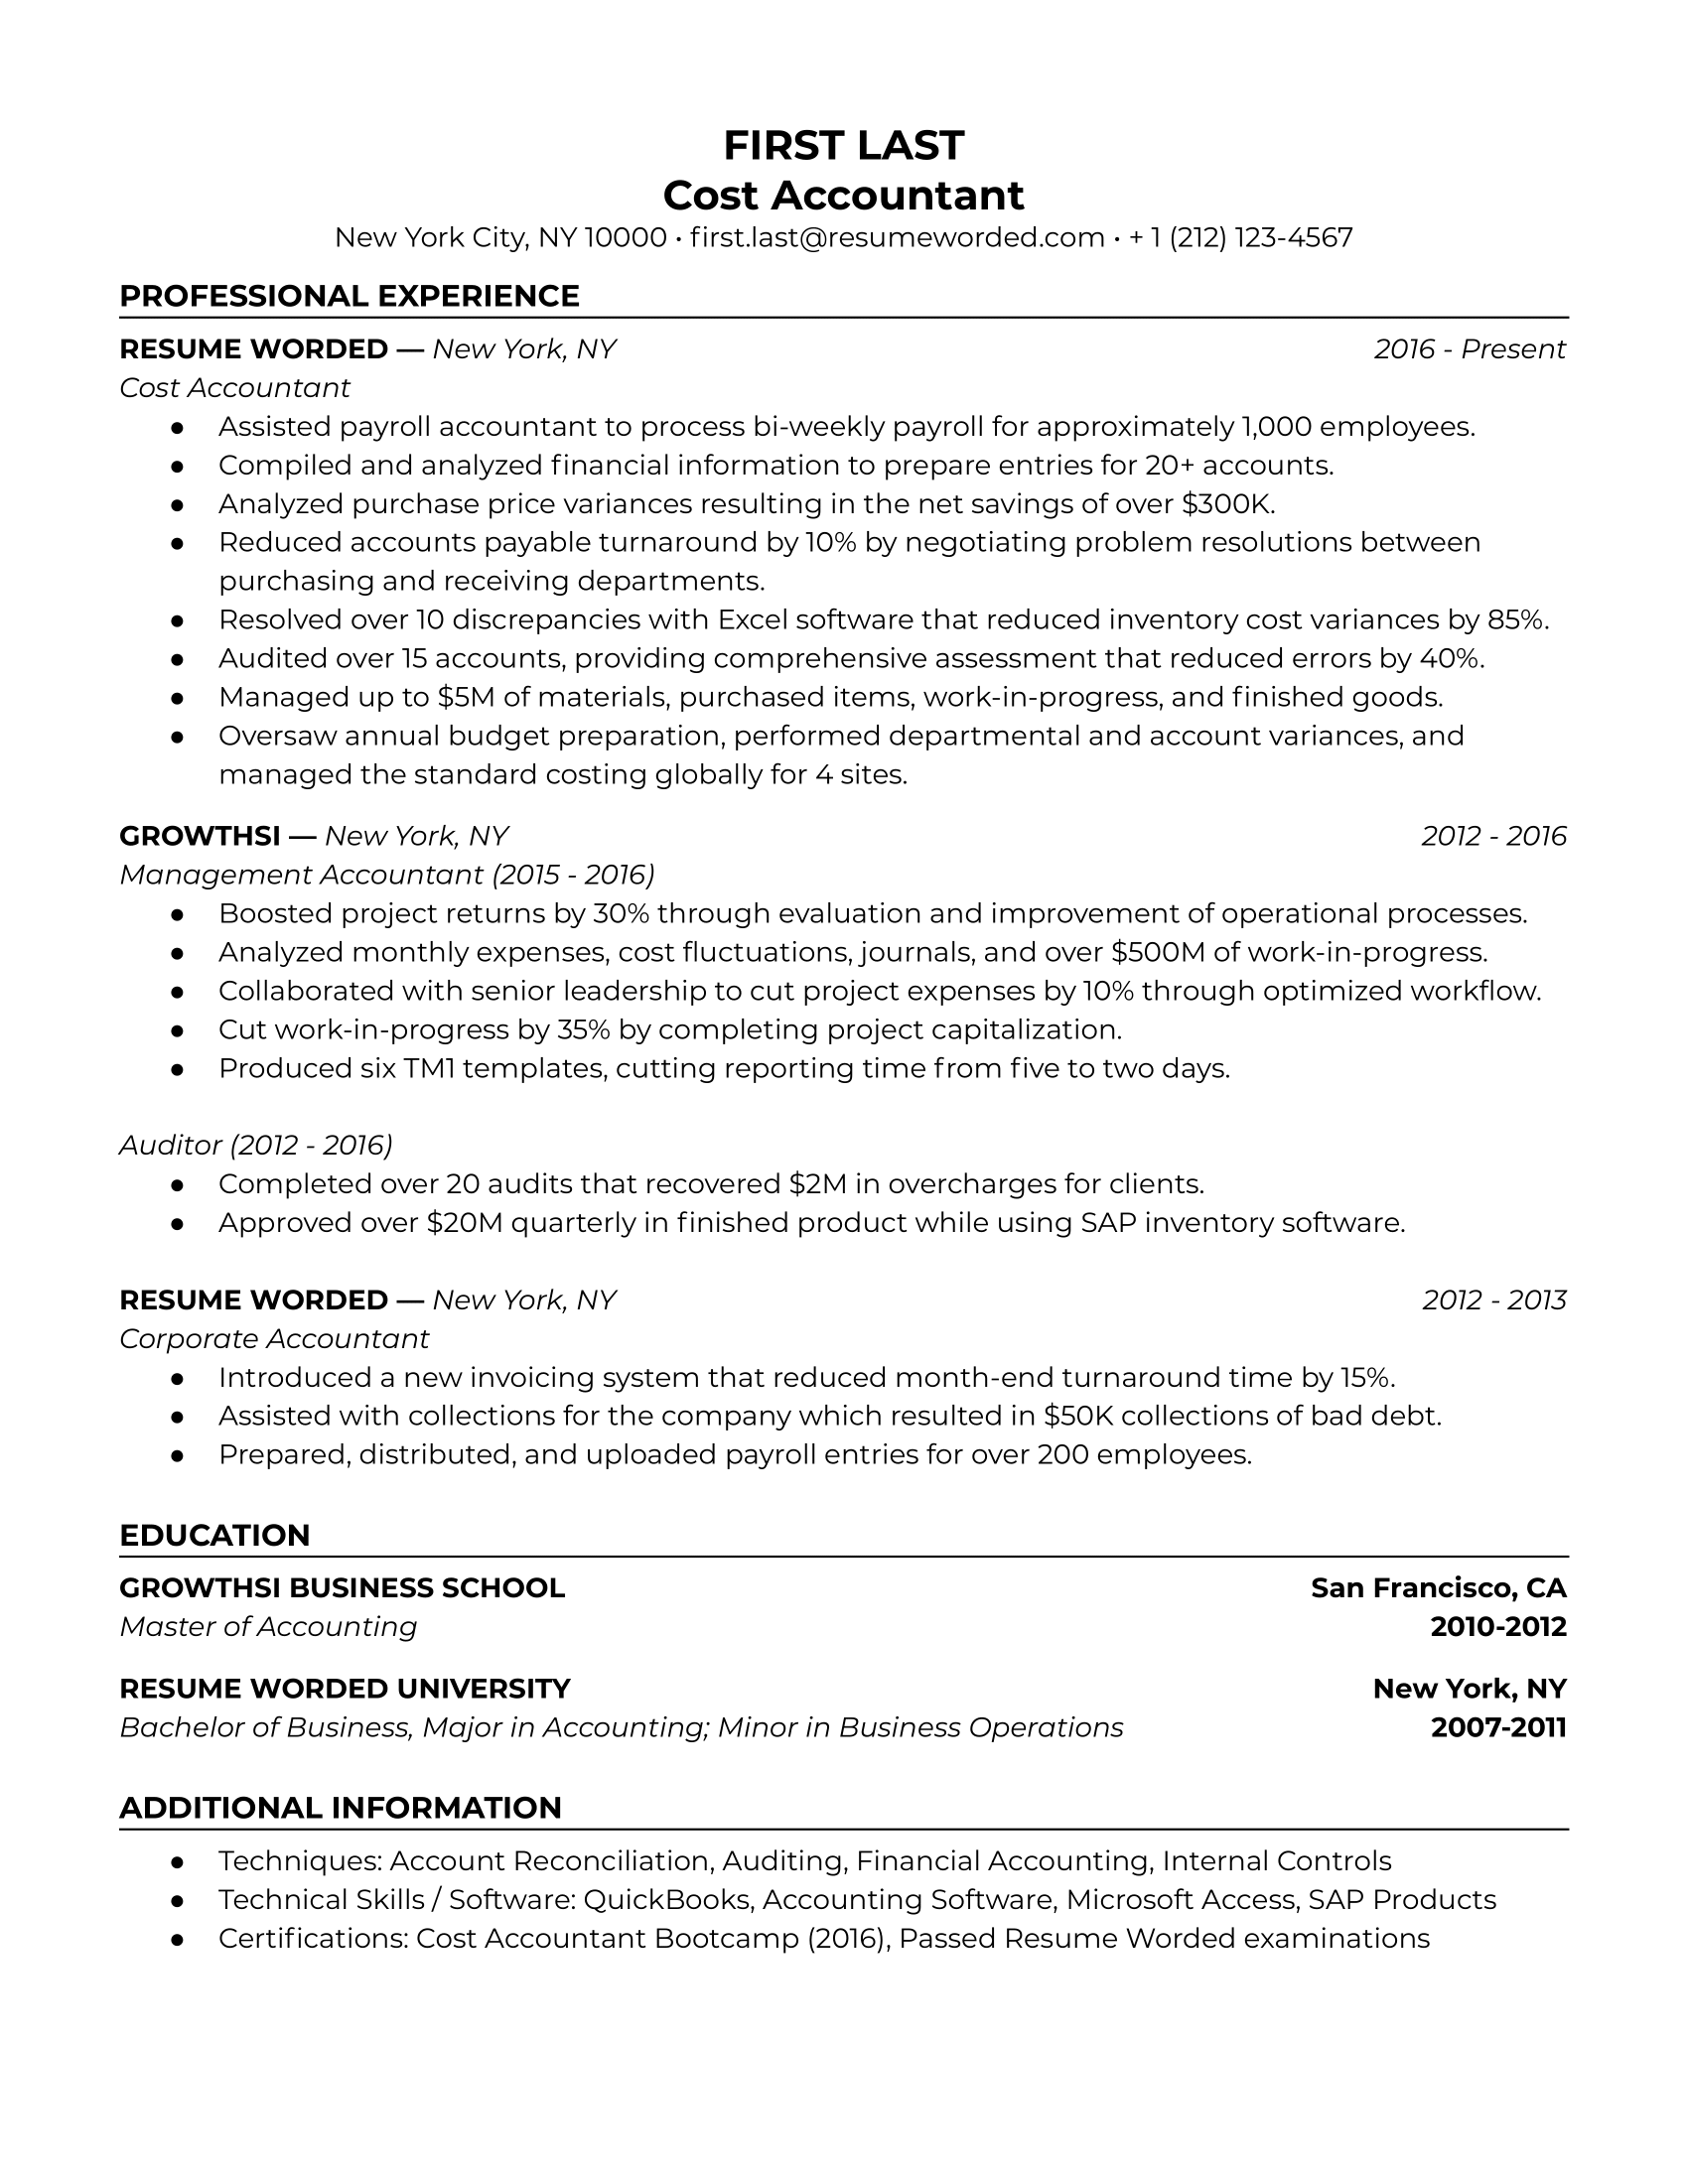 Cost accountant resume with promotions and industry-specific action verbs